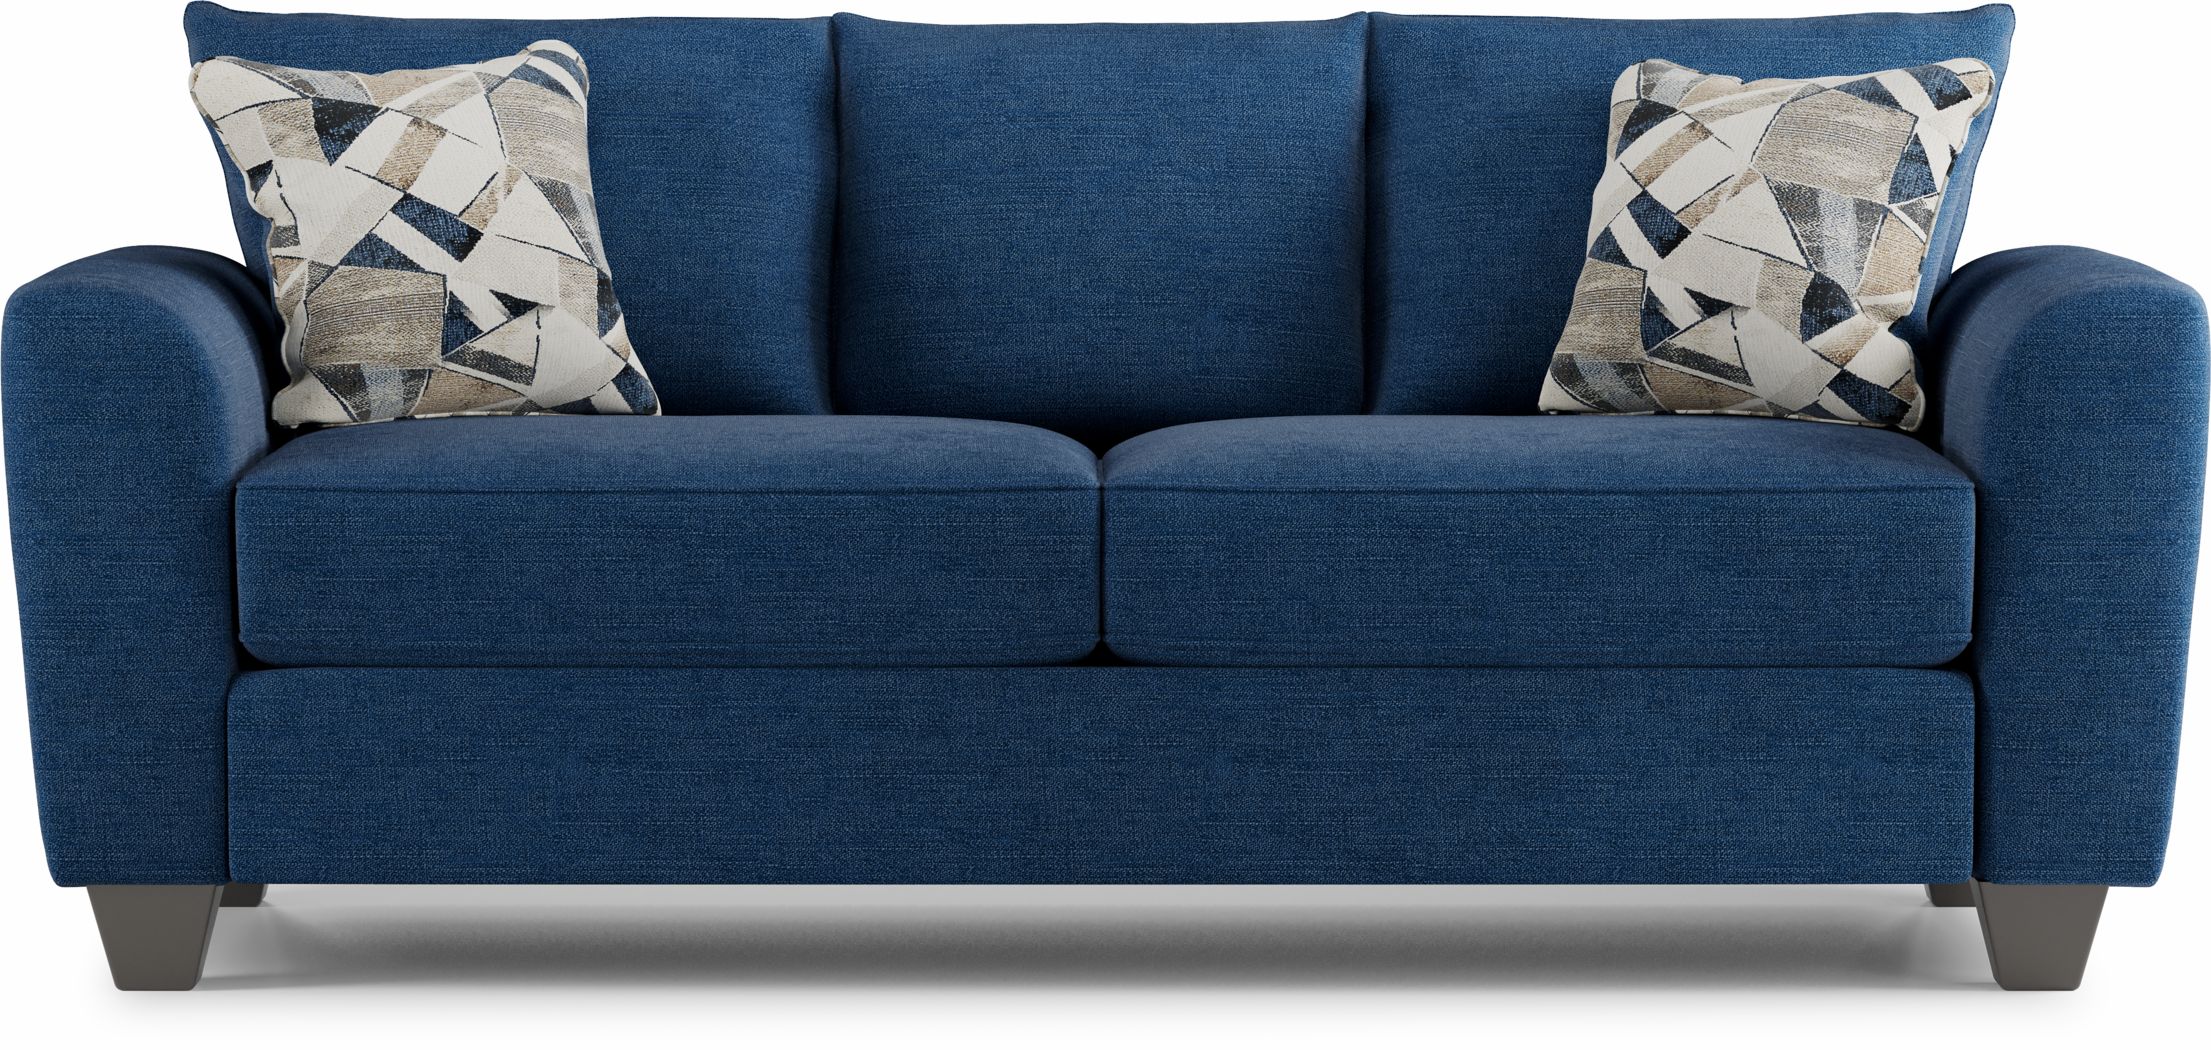 blue pull out sofa bed